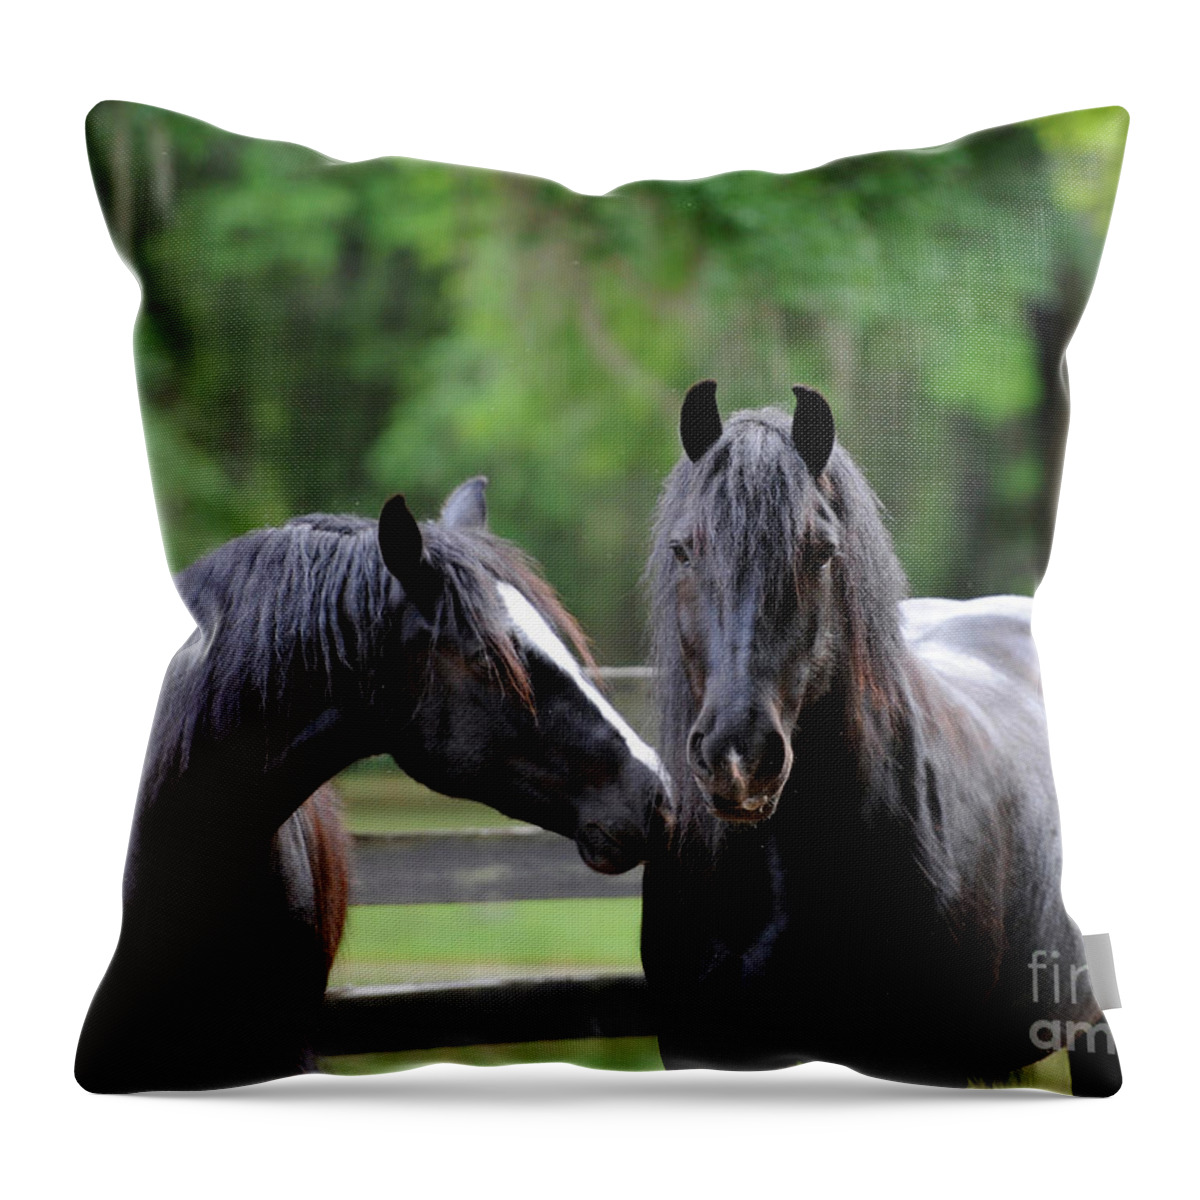 Gypsy Gold Farm Throw Pillow featuring the photograph Gypsy Vanner Mares by Carien Schippers